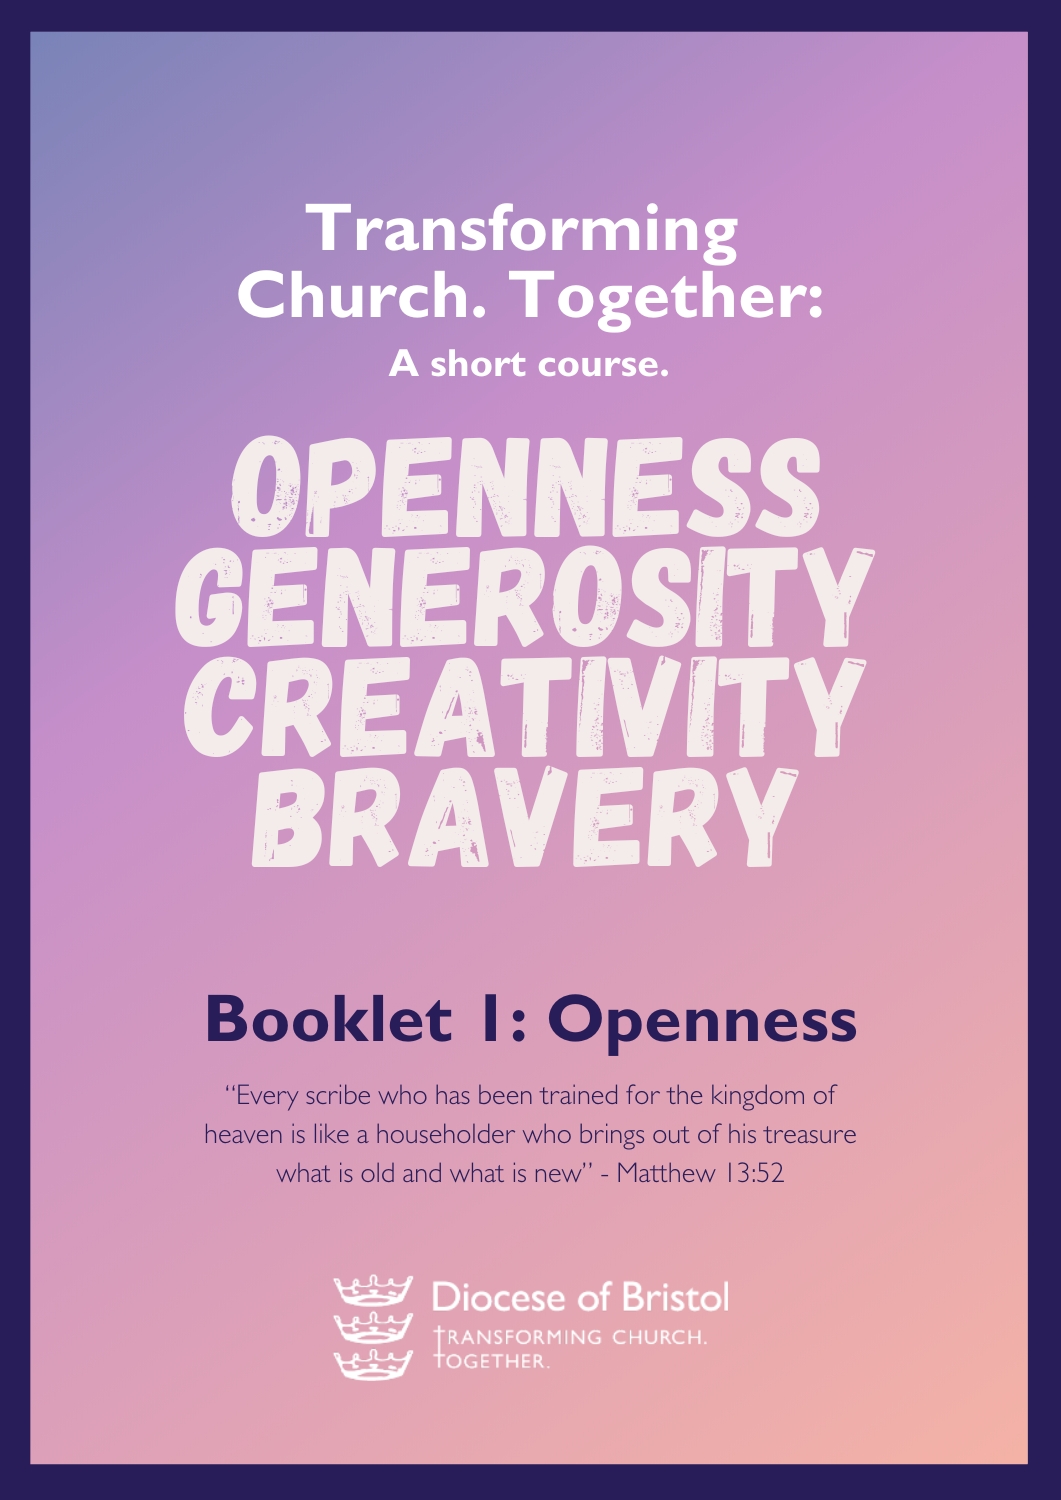 Booklet one: Openness